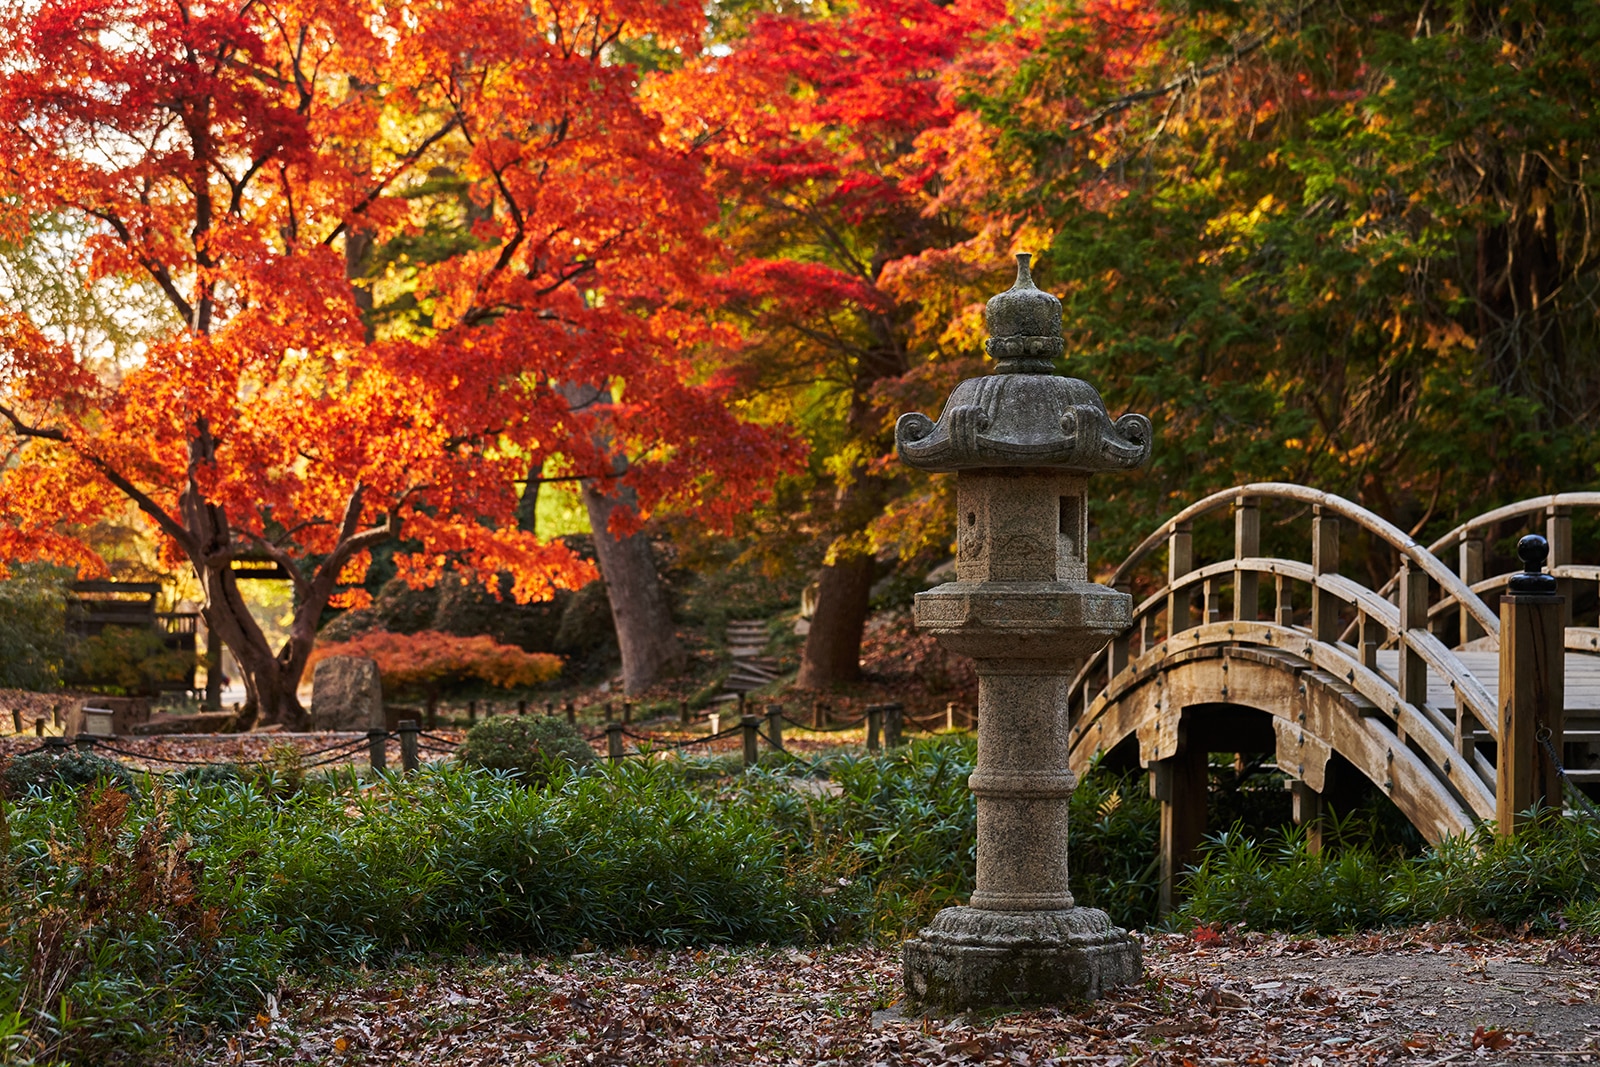 The Japanese Gardens with bright autumn leaves.